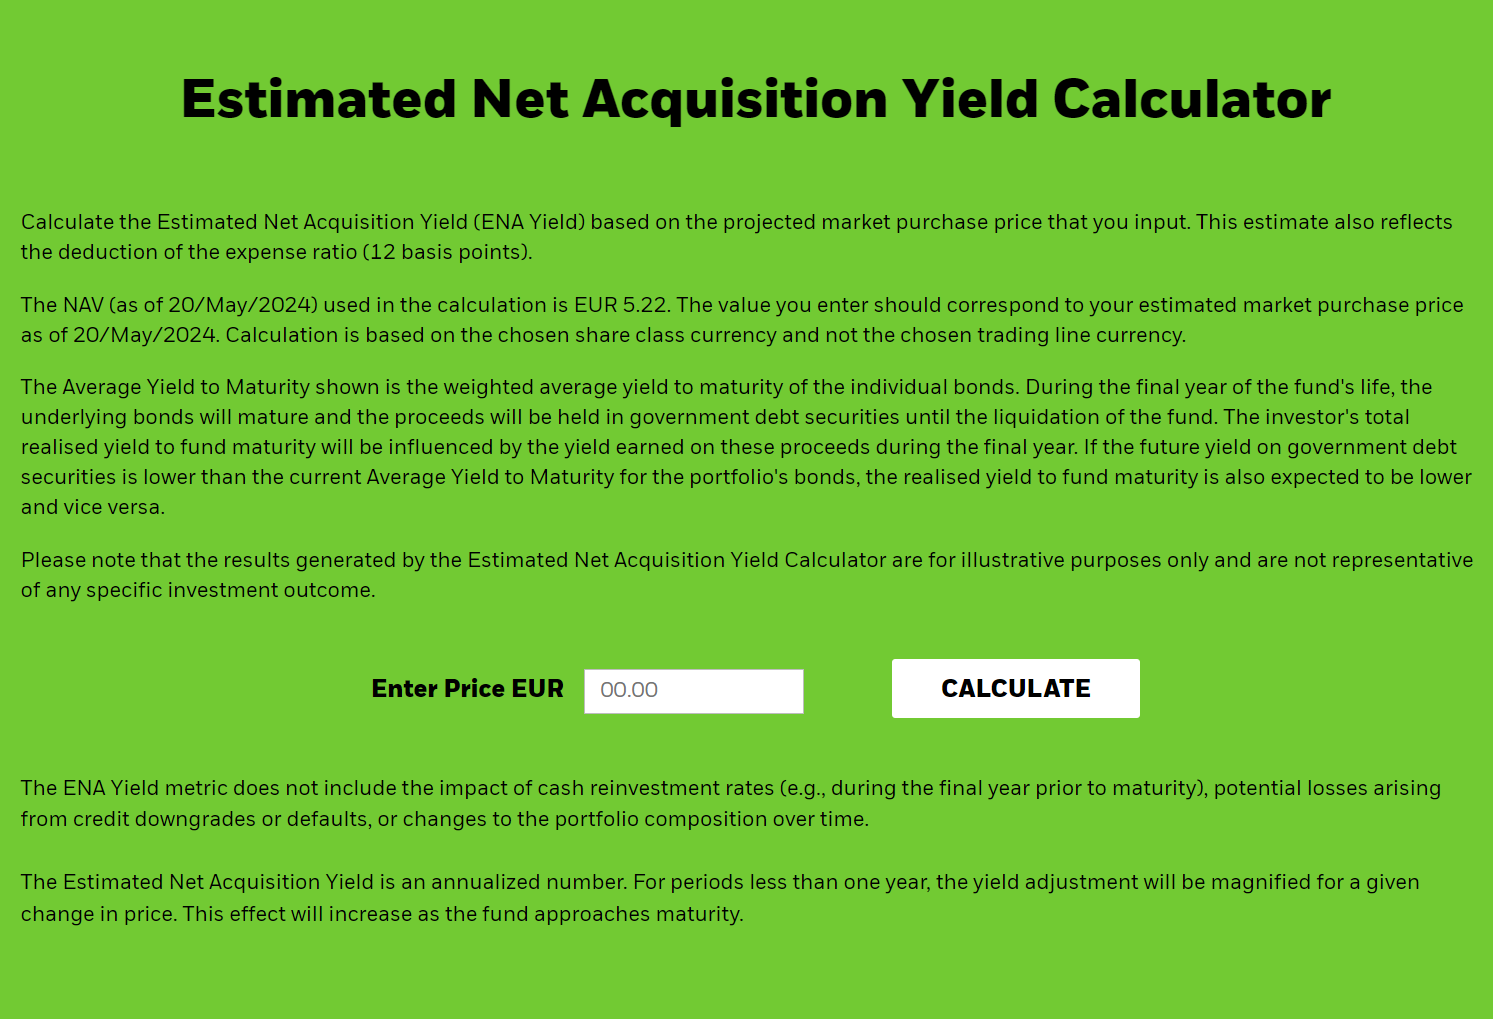 Image of Estimated Net Acquisition Yield Calculator